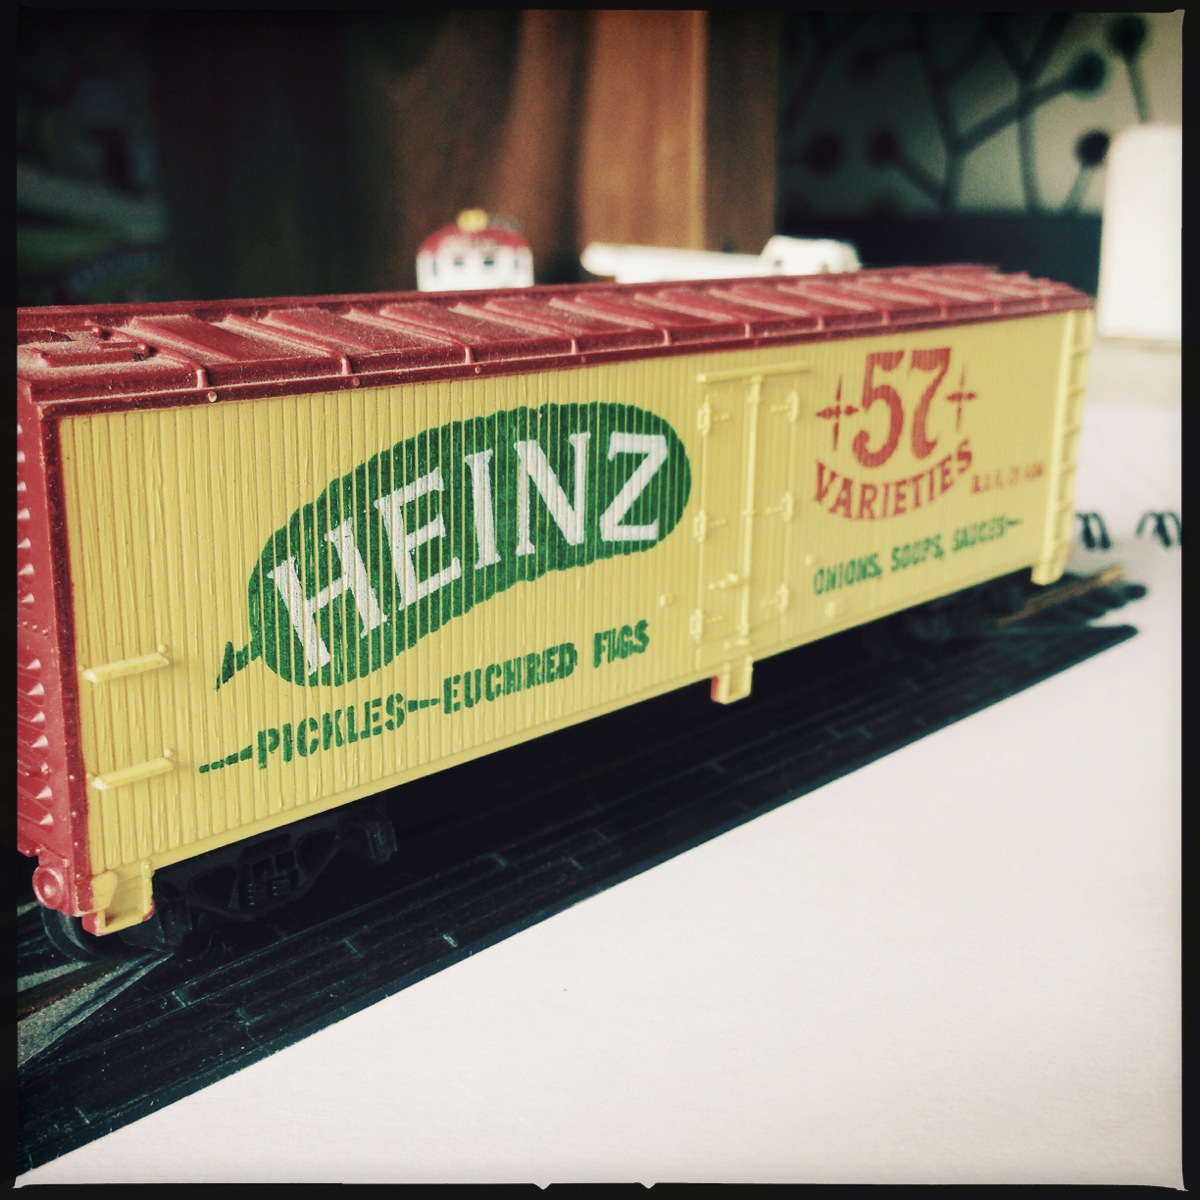 Tyco Bicentennial HO Scale Train Heinz freight rail car by Jon Armstrong for blurbomat.com. Copyright/credit: Jon Armstrong